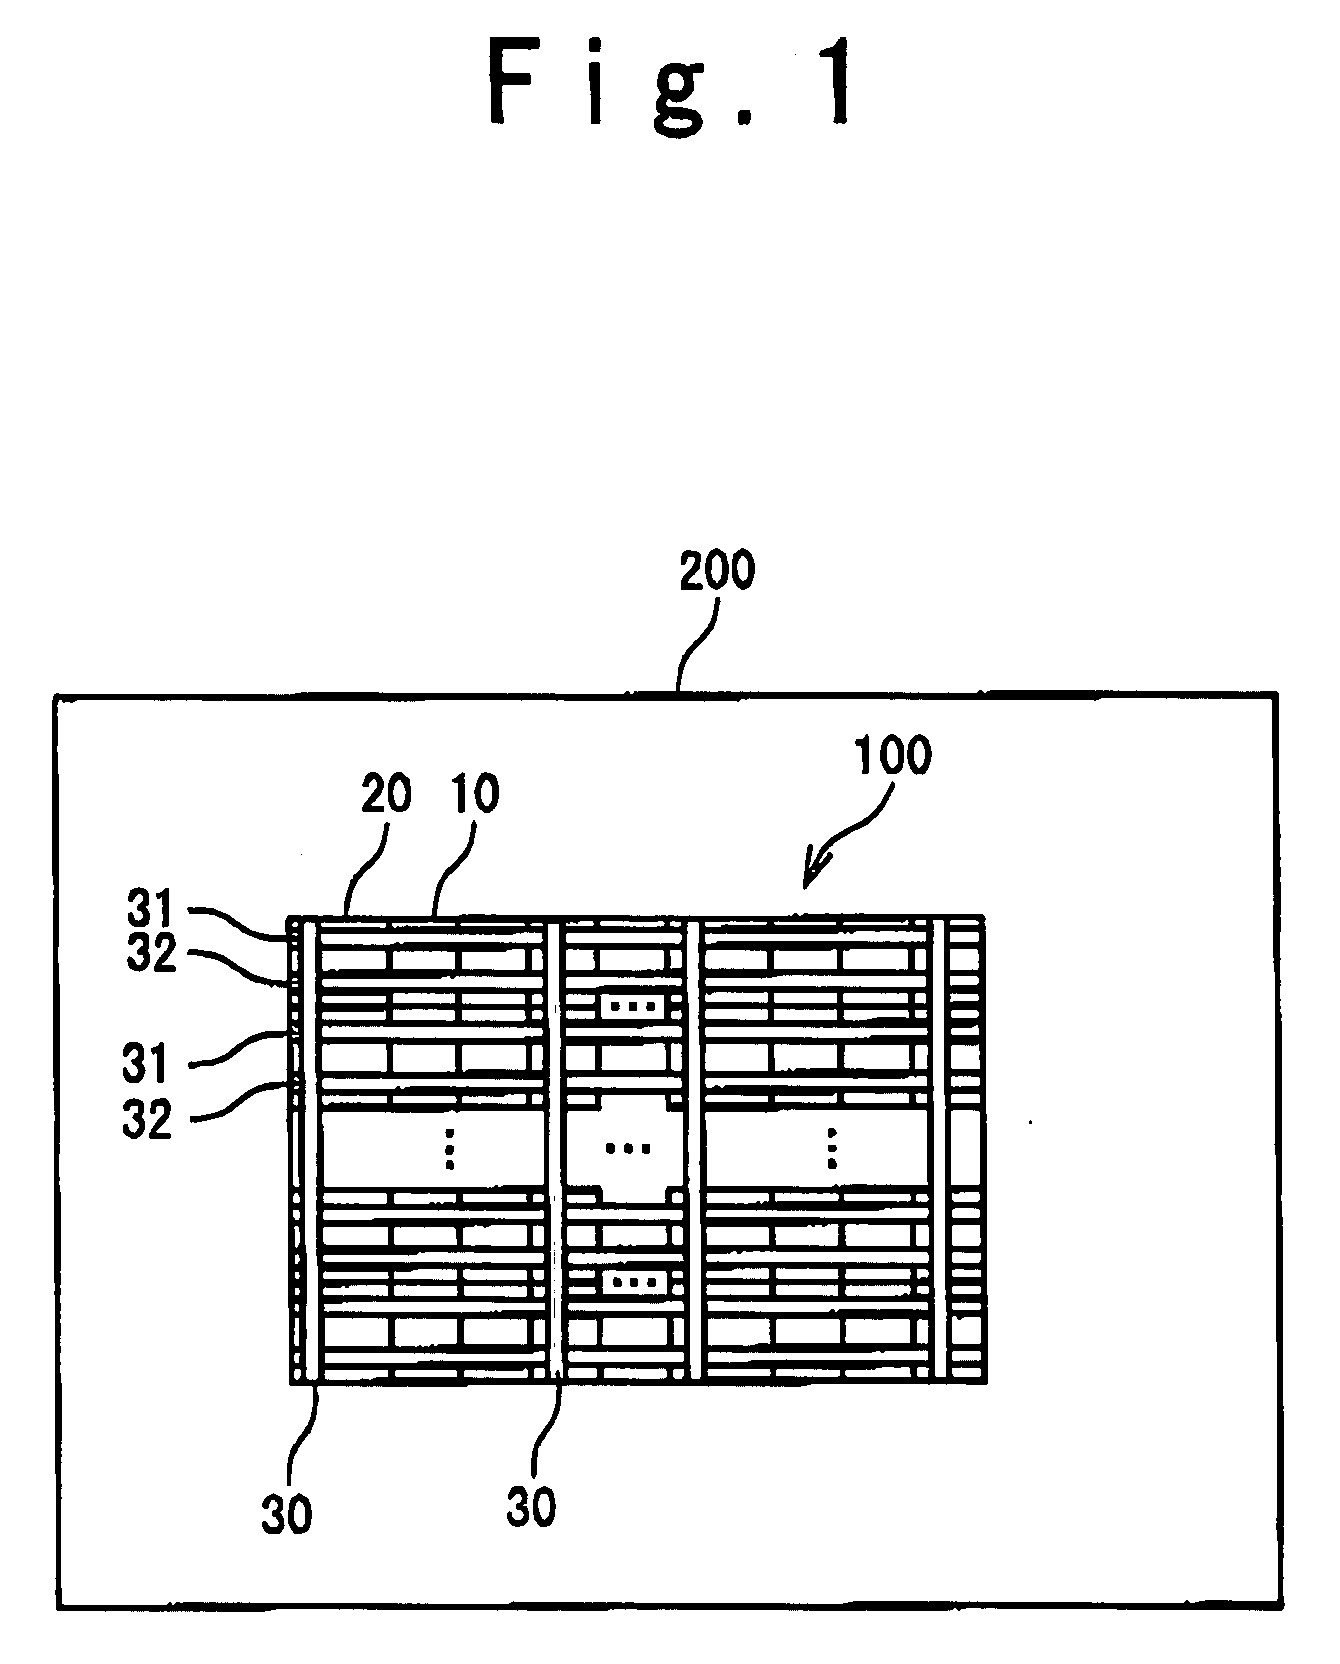 Size-reduced layout of cell-based integrated circuit with power switch